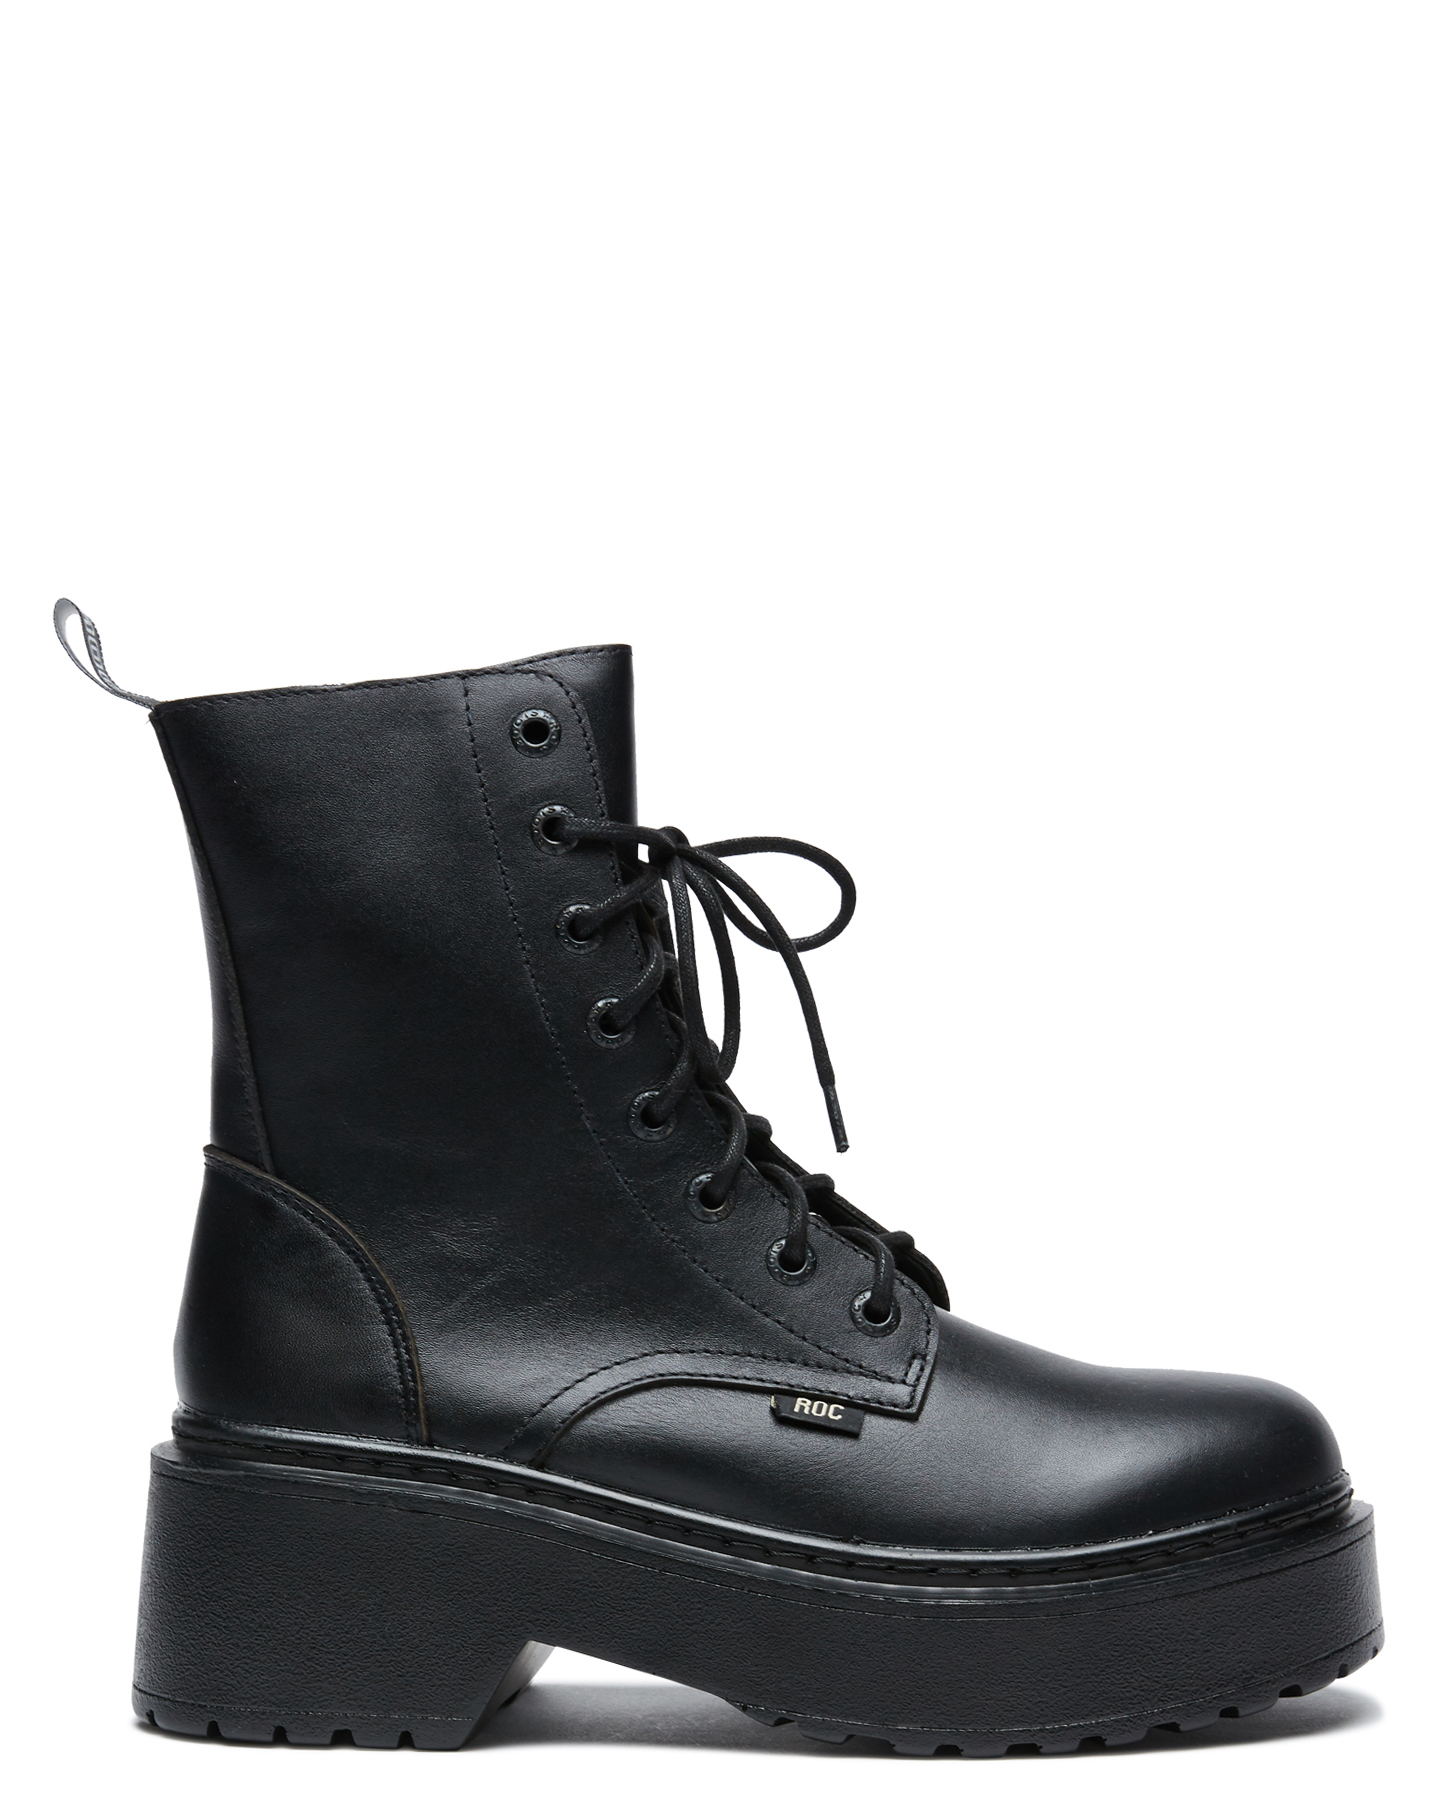 Roc Boots Womens Tomboy Boot Black Leather